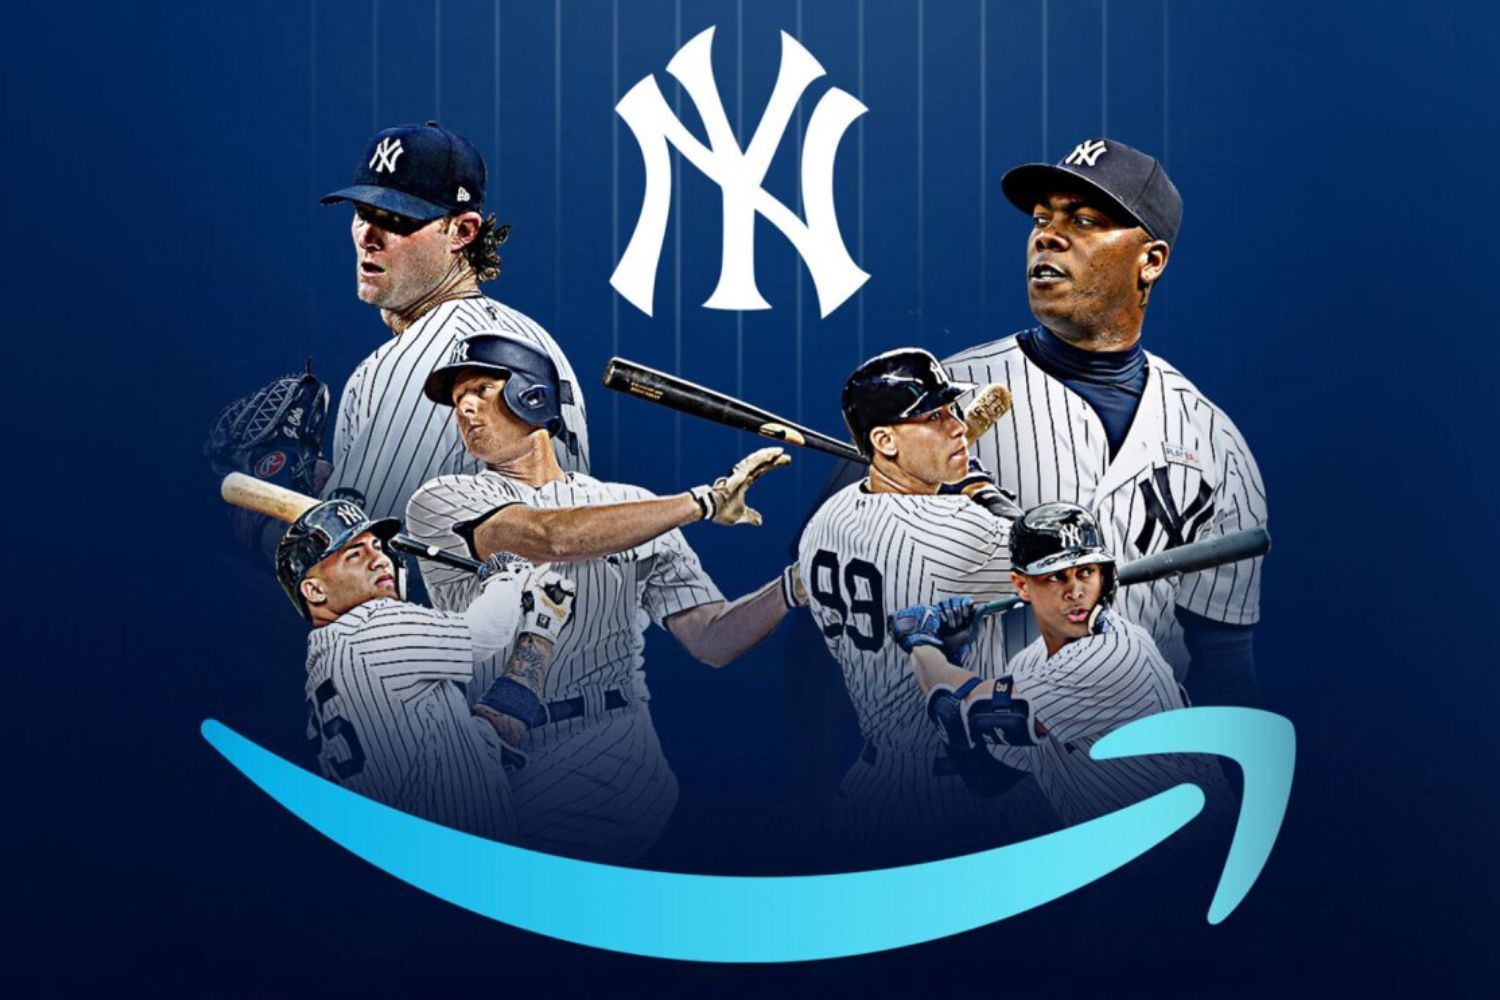 How To Watch NY Yankees On Amazon Prime